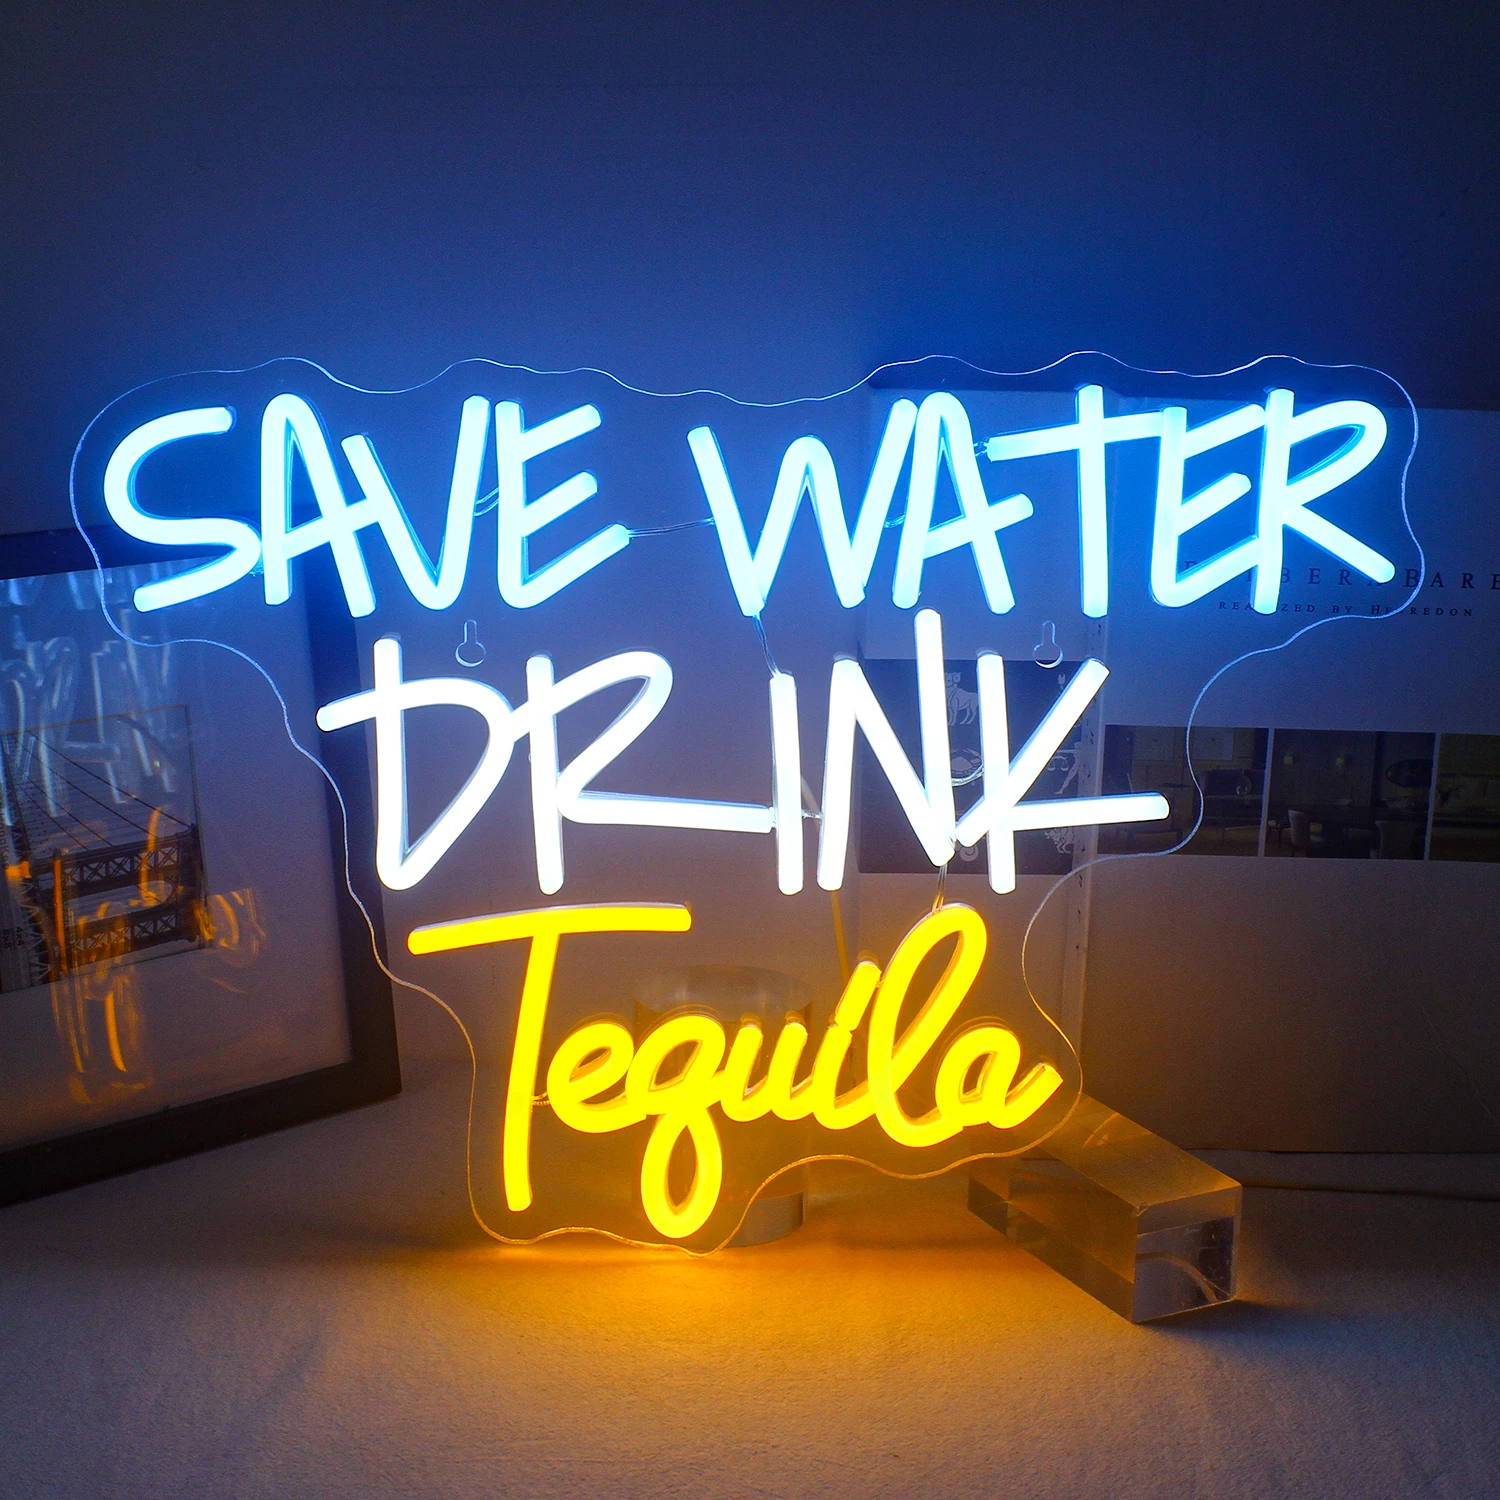 Save Water Drink Tequila Neon Sign Led Neon Lights for Wall Decor USB Light Up Signs Beer Bar Restaurant Cafe Club Party Decor lemon cup neon sign led hanging club drink restaurant bar party aesthetic room beverage shop illuminated sign wall decor gift